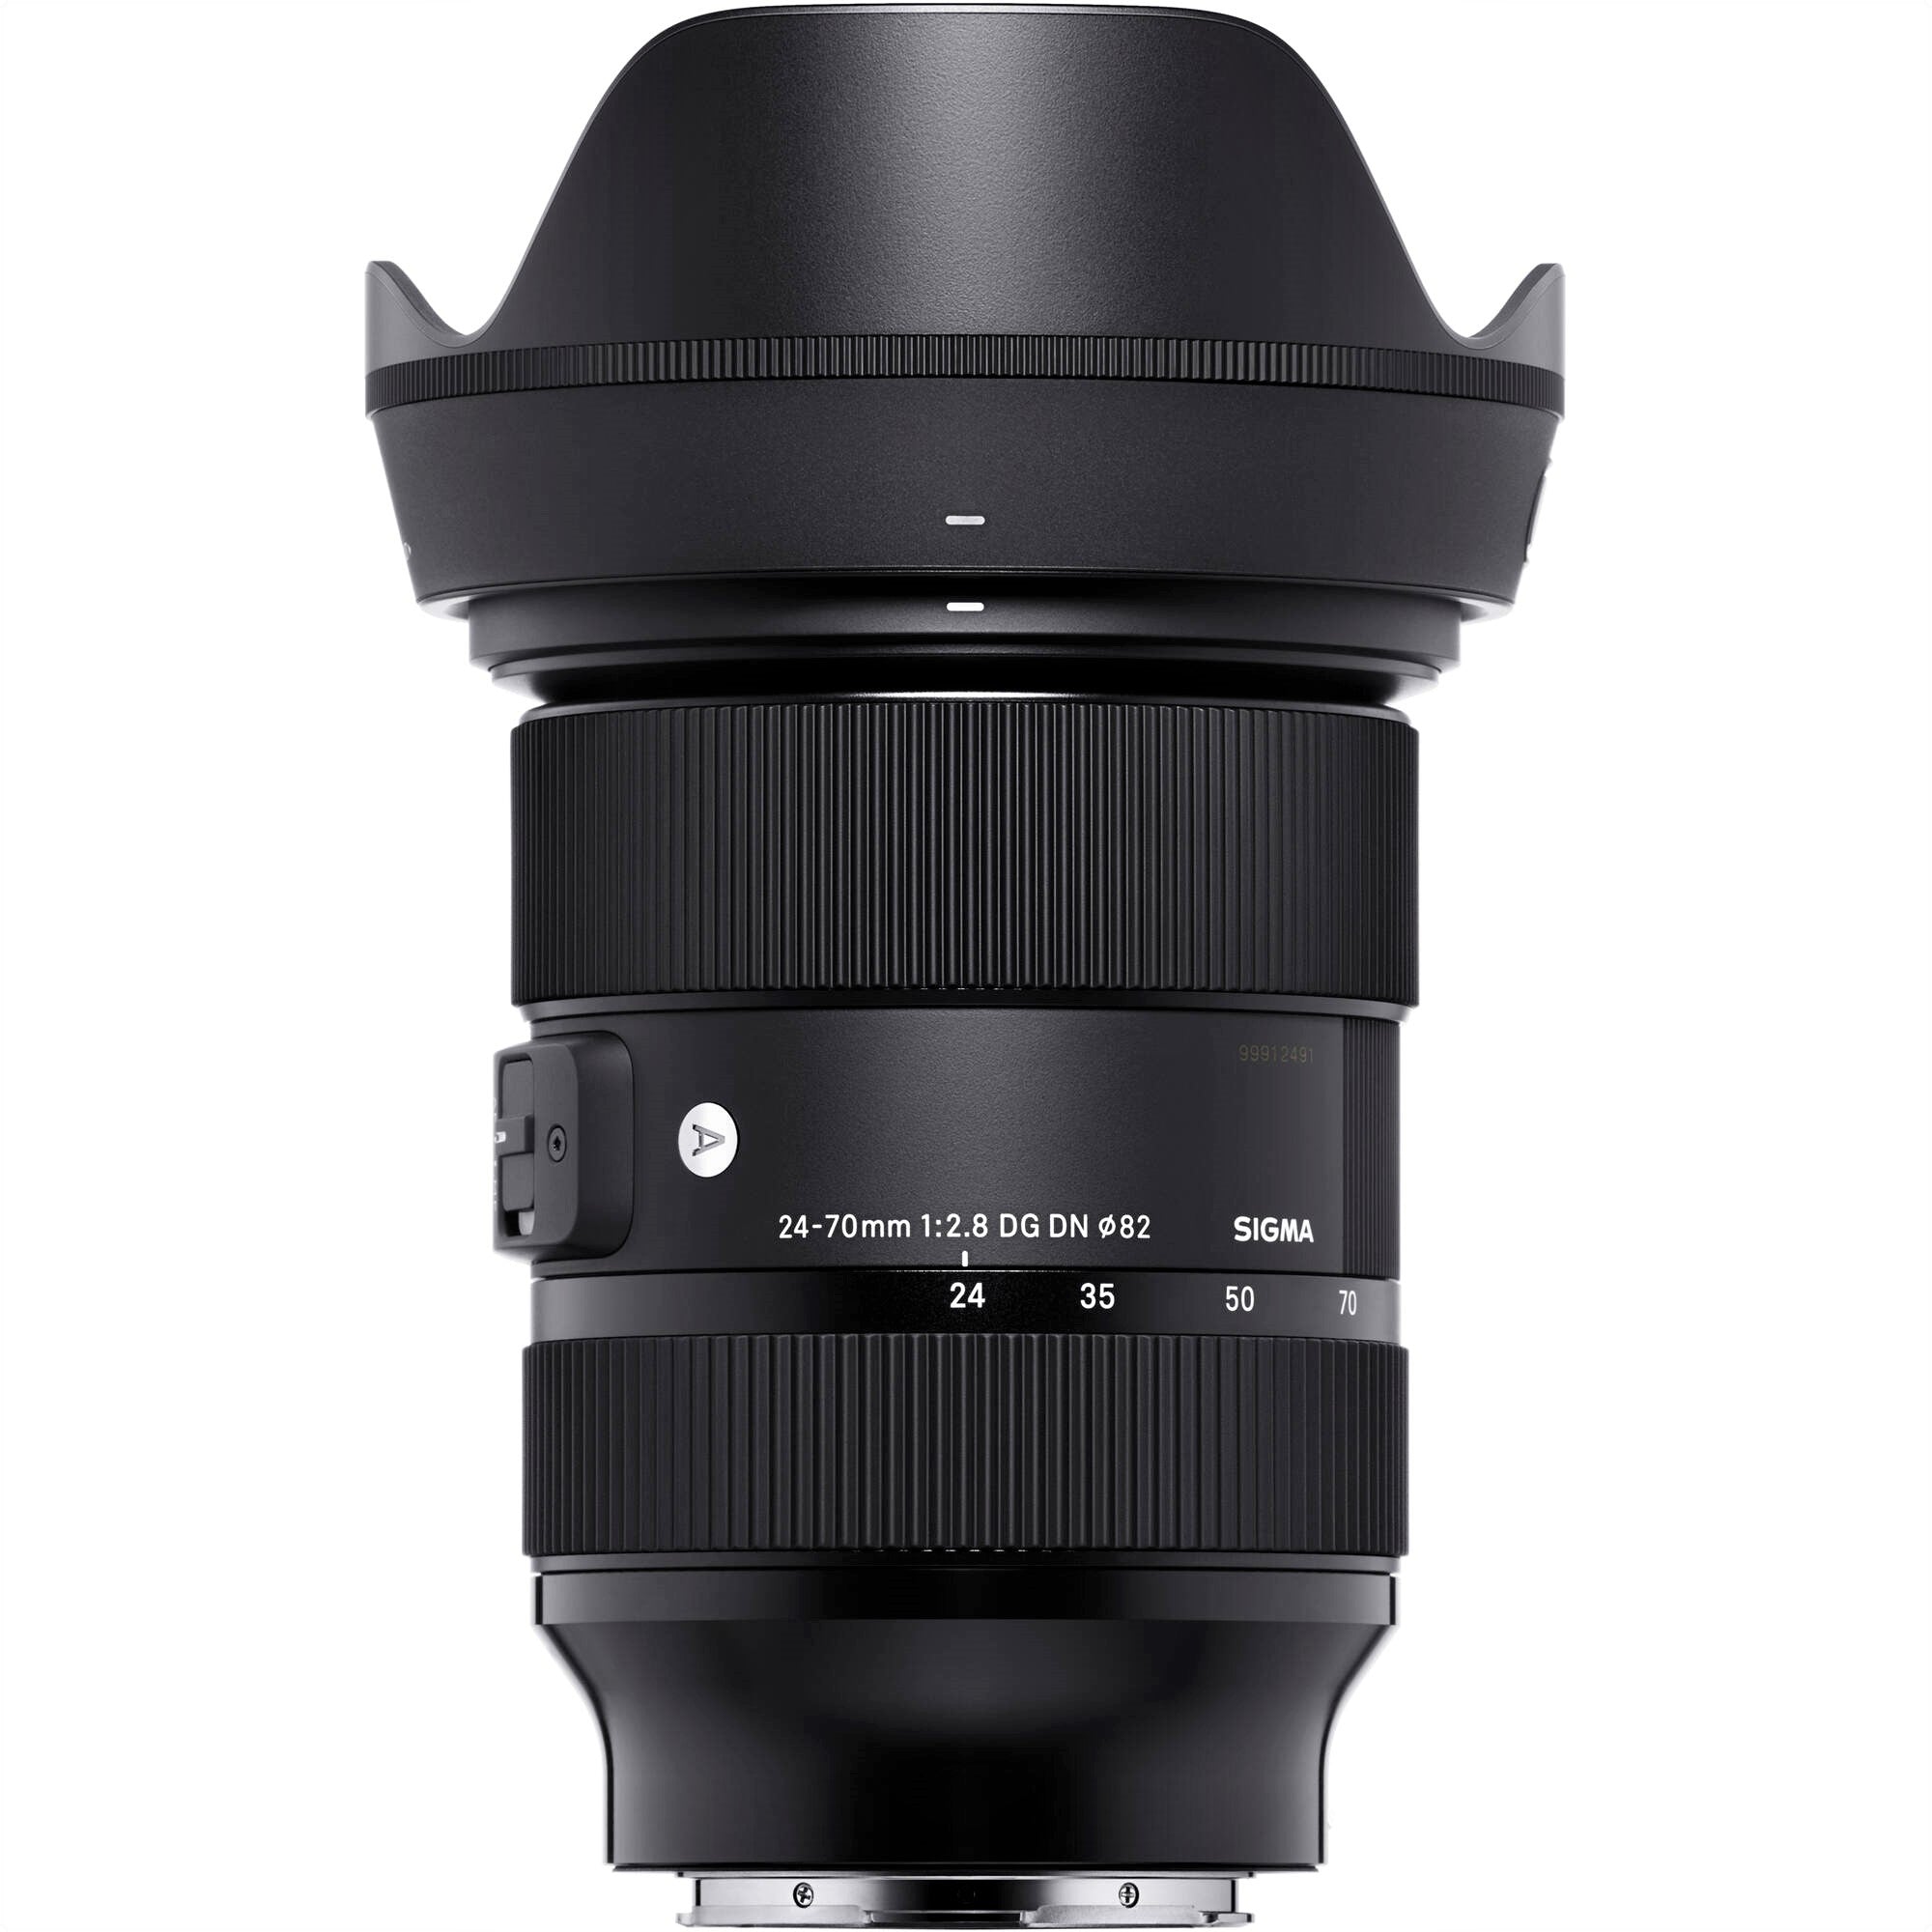 Sigma 24-70mm F2.8 DG DN Art Lens (Leica L Mount) with Attached Lens Hood on the Top